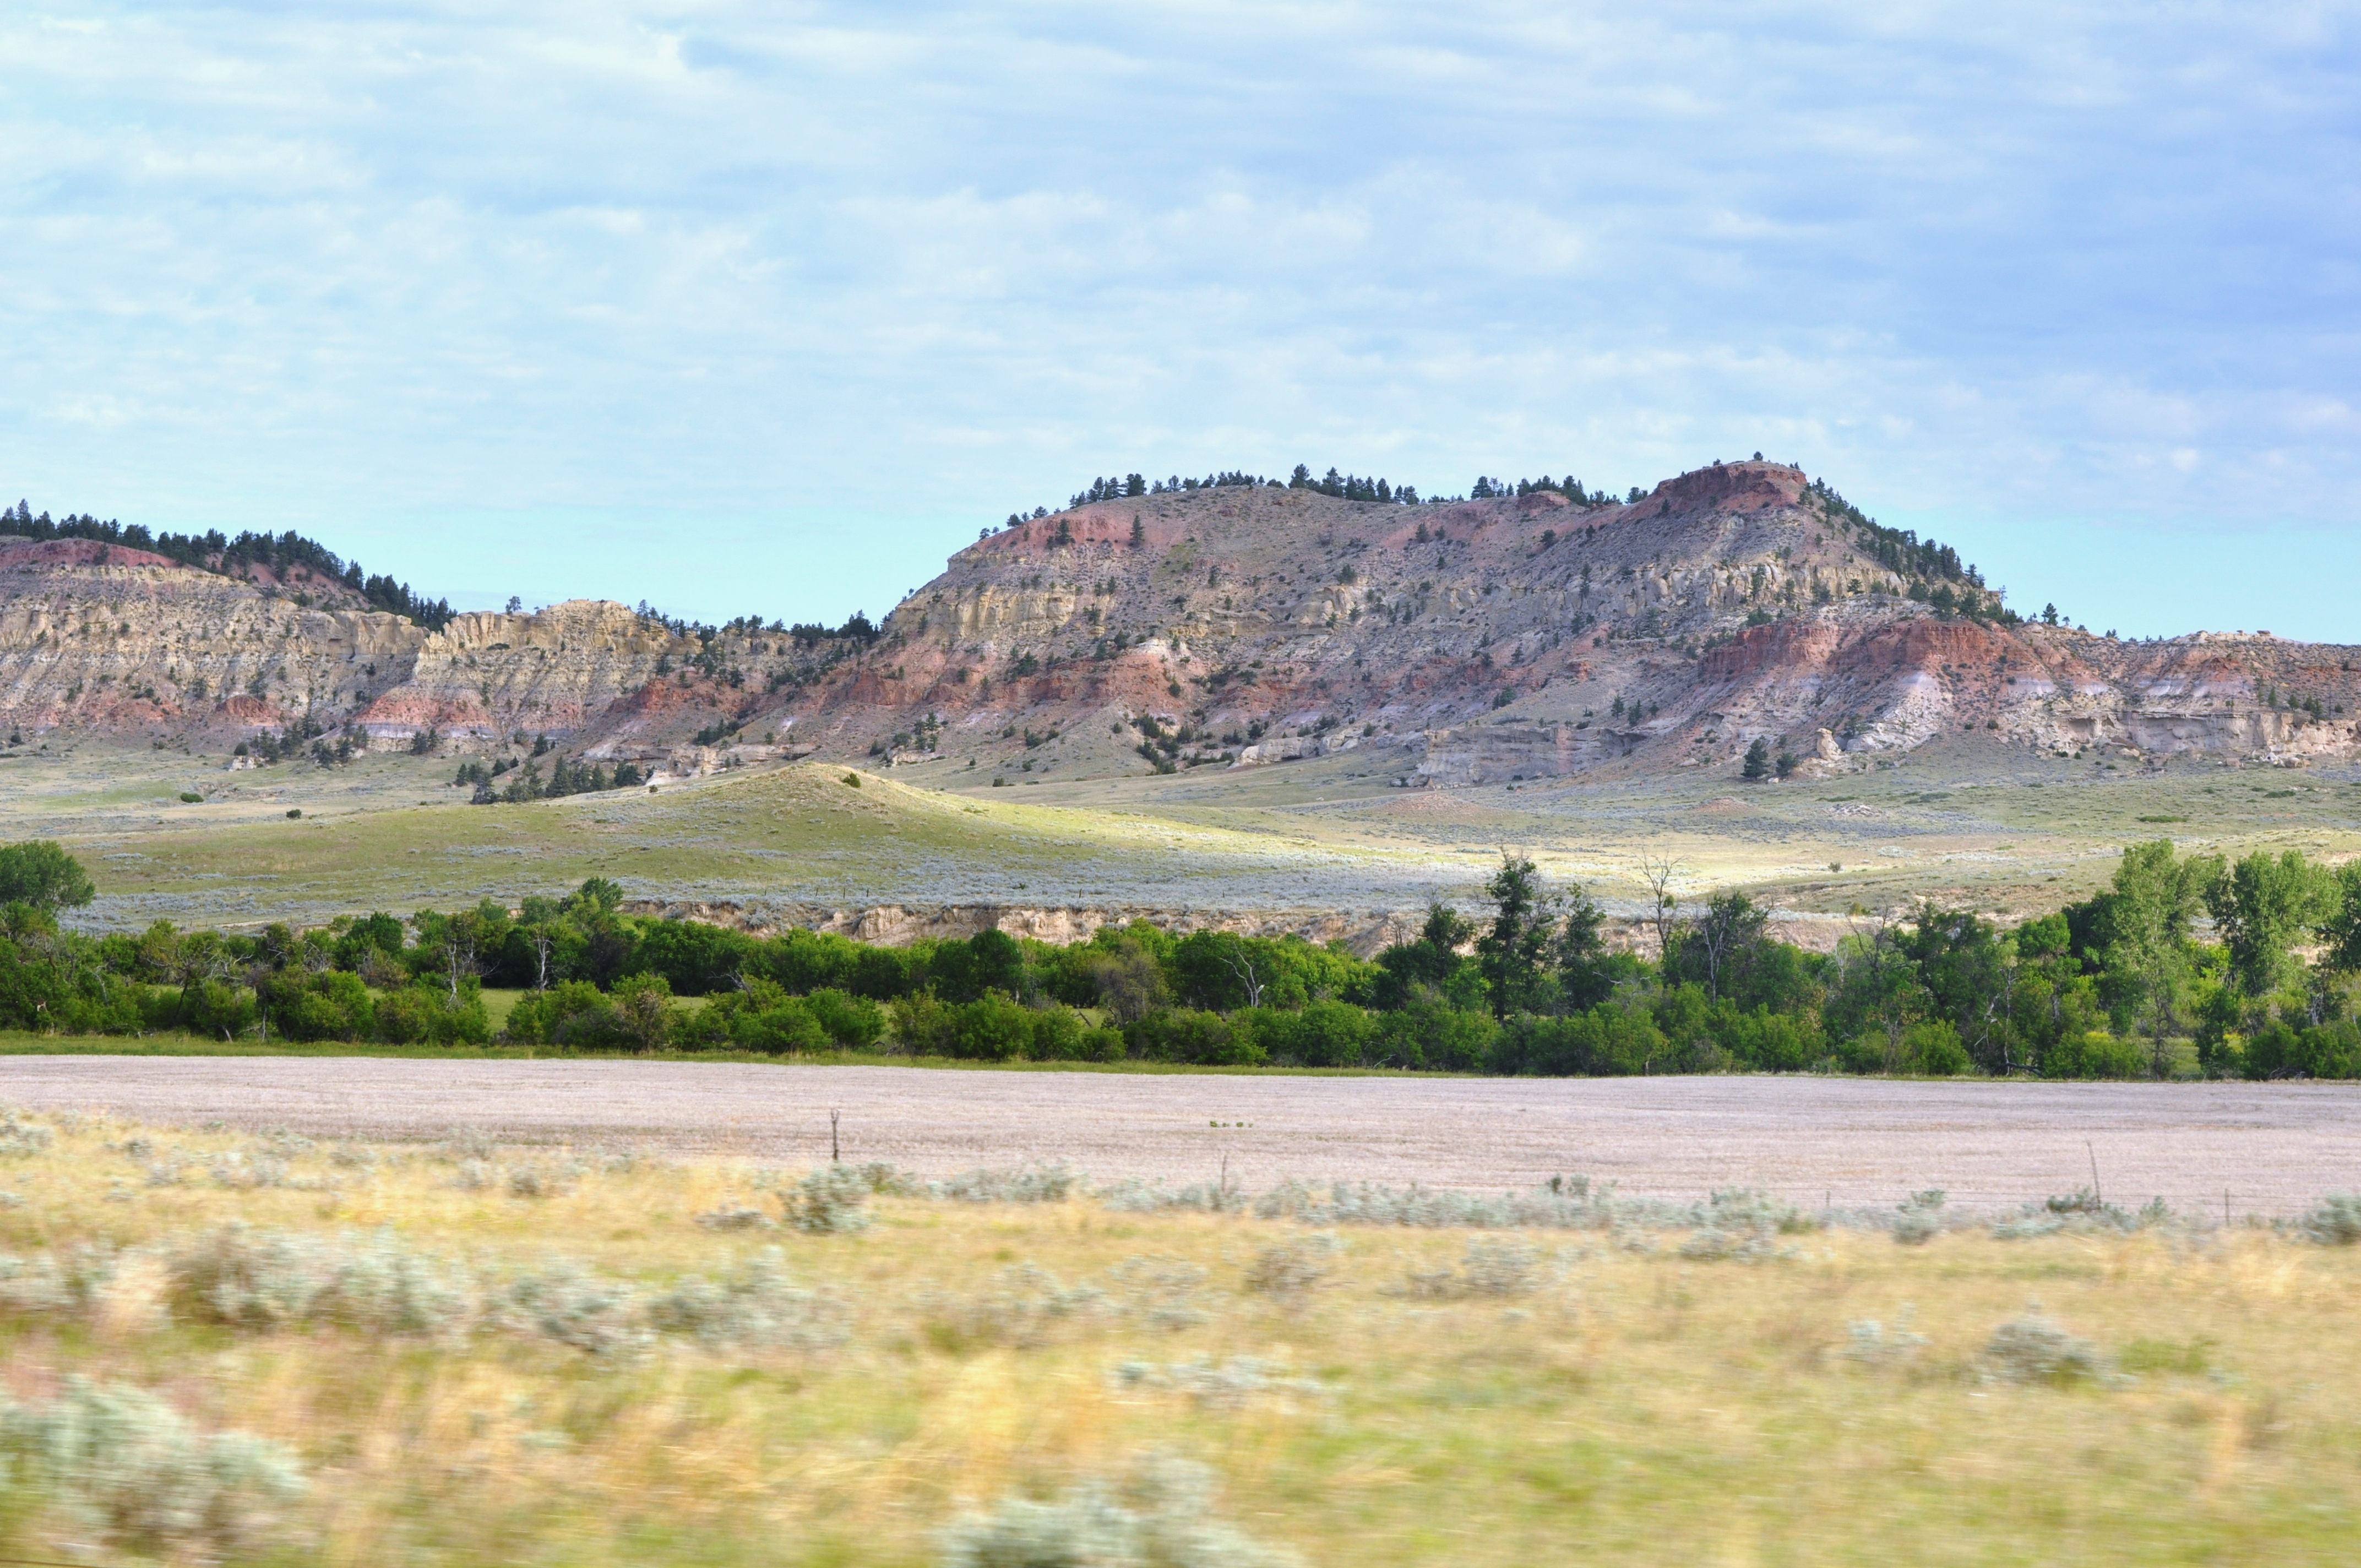 The Northern Cheyenne Reservation, home to the Northern Cheyenne Nation in Southern Montana. Photographer June 7, 2012.